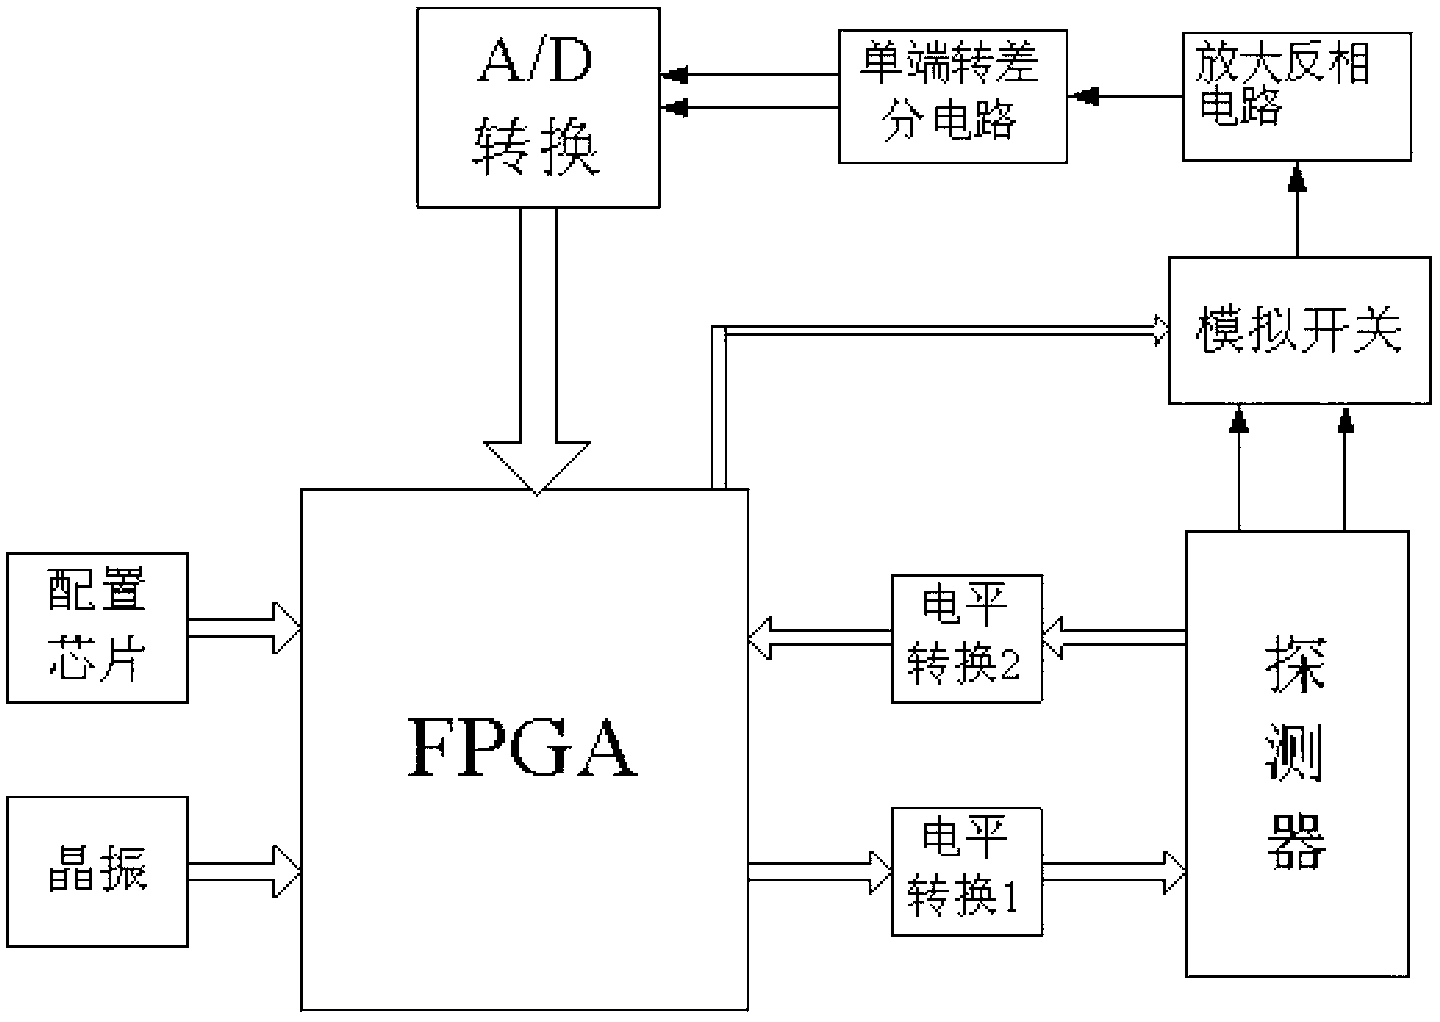 Acquisition circuit device and method for industrial CT (Computed Tomography) detector